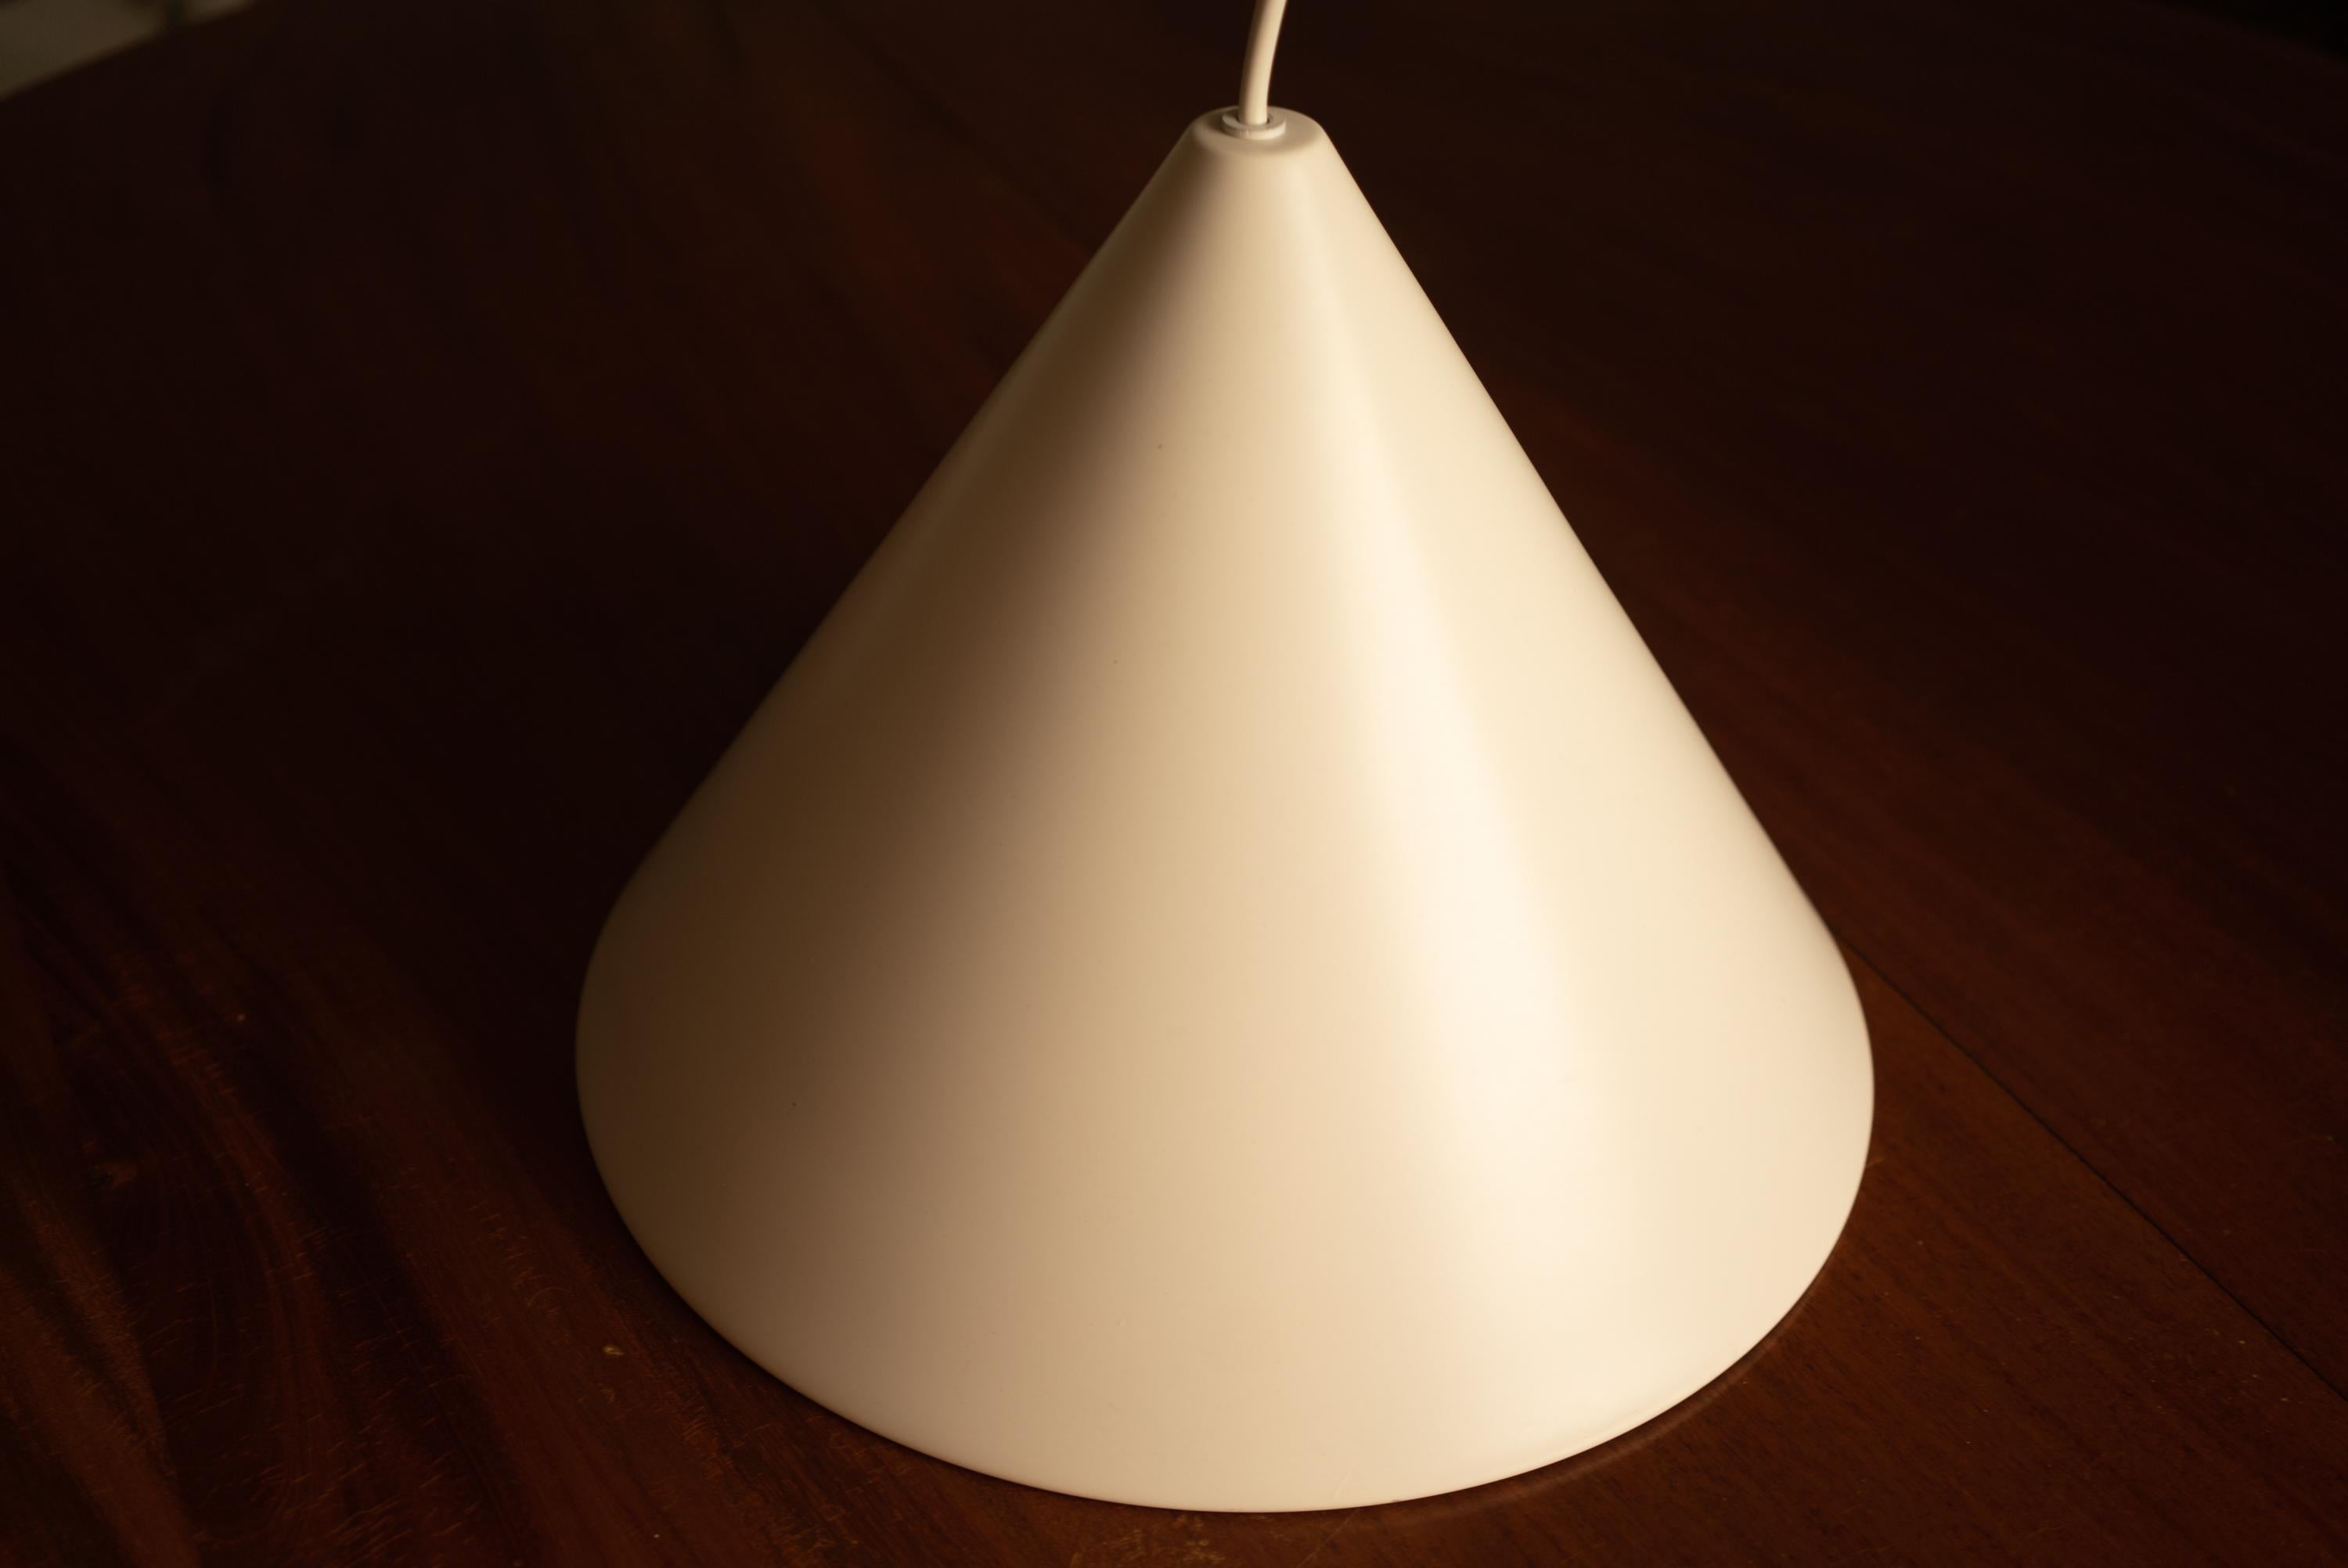 Small white Arne Jacobsen Billiard hanging lamp designed by Arne Jacobsen for Louis Poulsen in the 1960s. These lamps provide direct down light and are often used for above billiard tables. The condition is still very good and the wiring has been